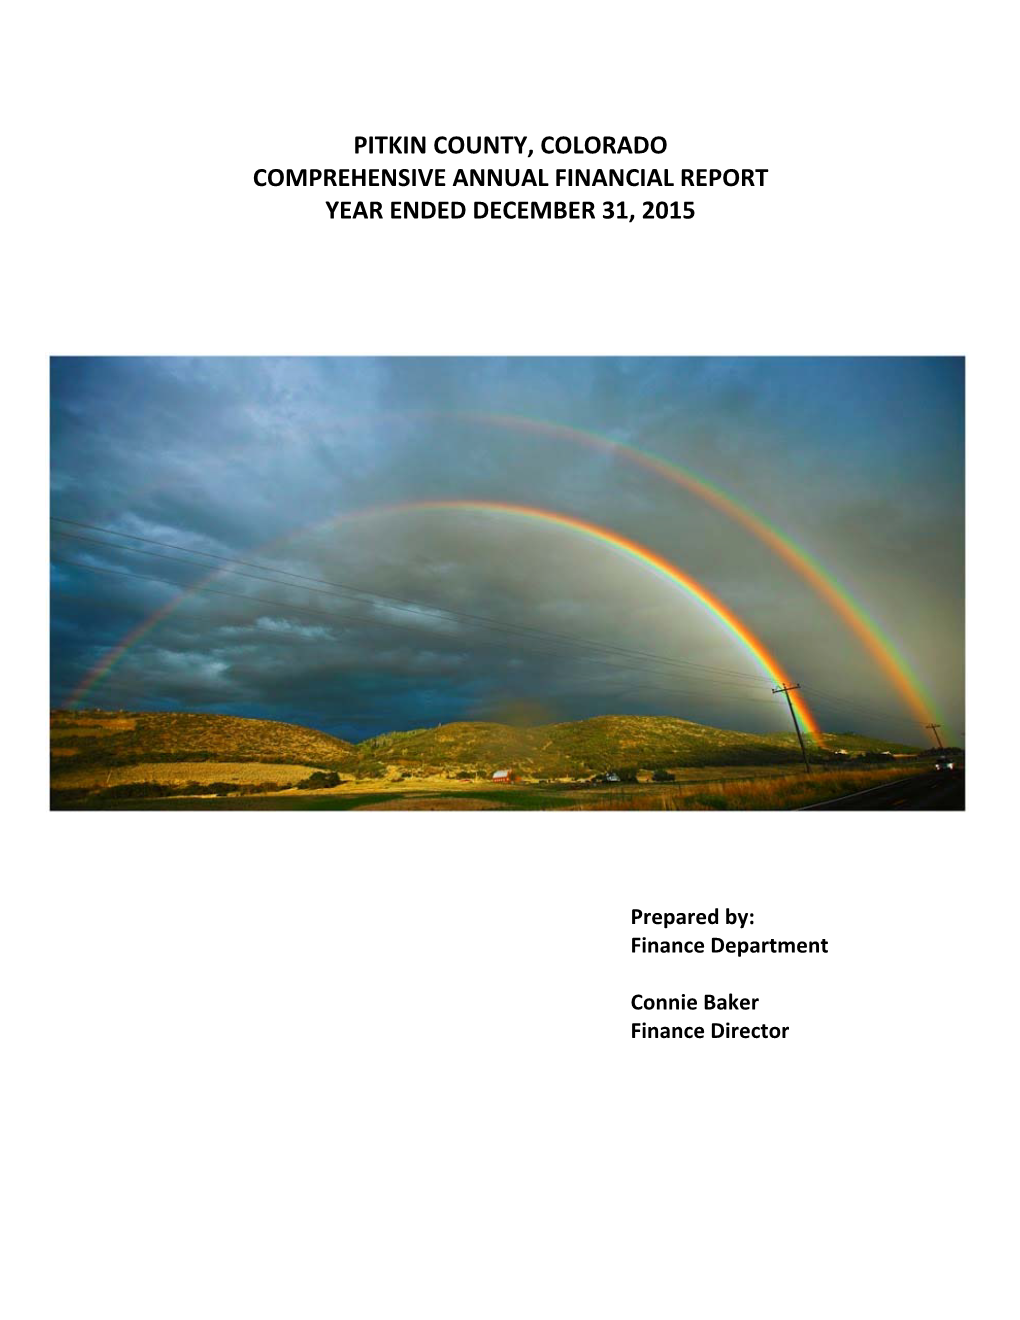 Pitkin County, Colorado Comprehensive Annual Financial Report Year Ended December 31, 2015